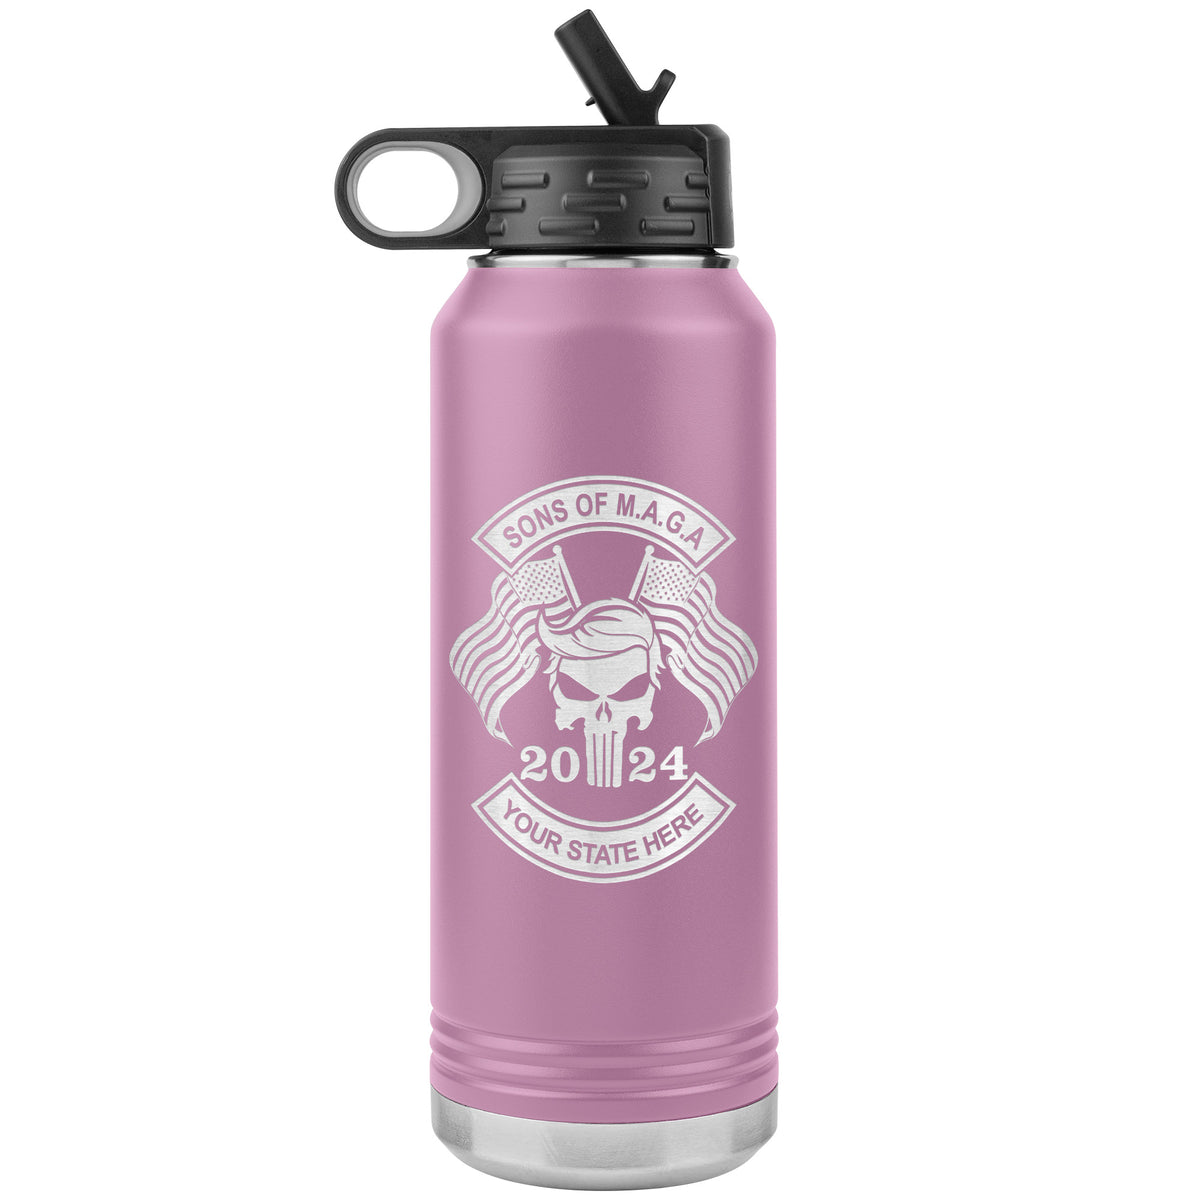 Sons of MAGA - 32oz Water Bottle